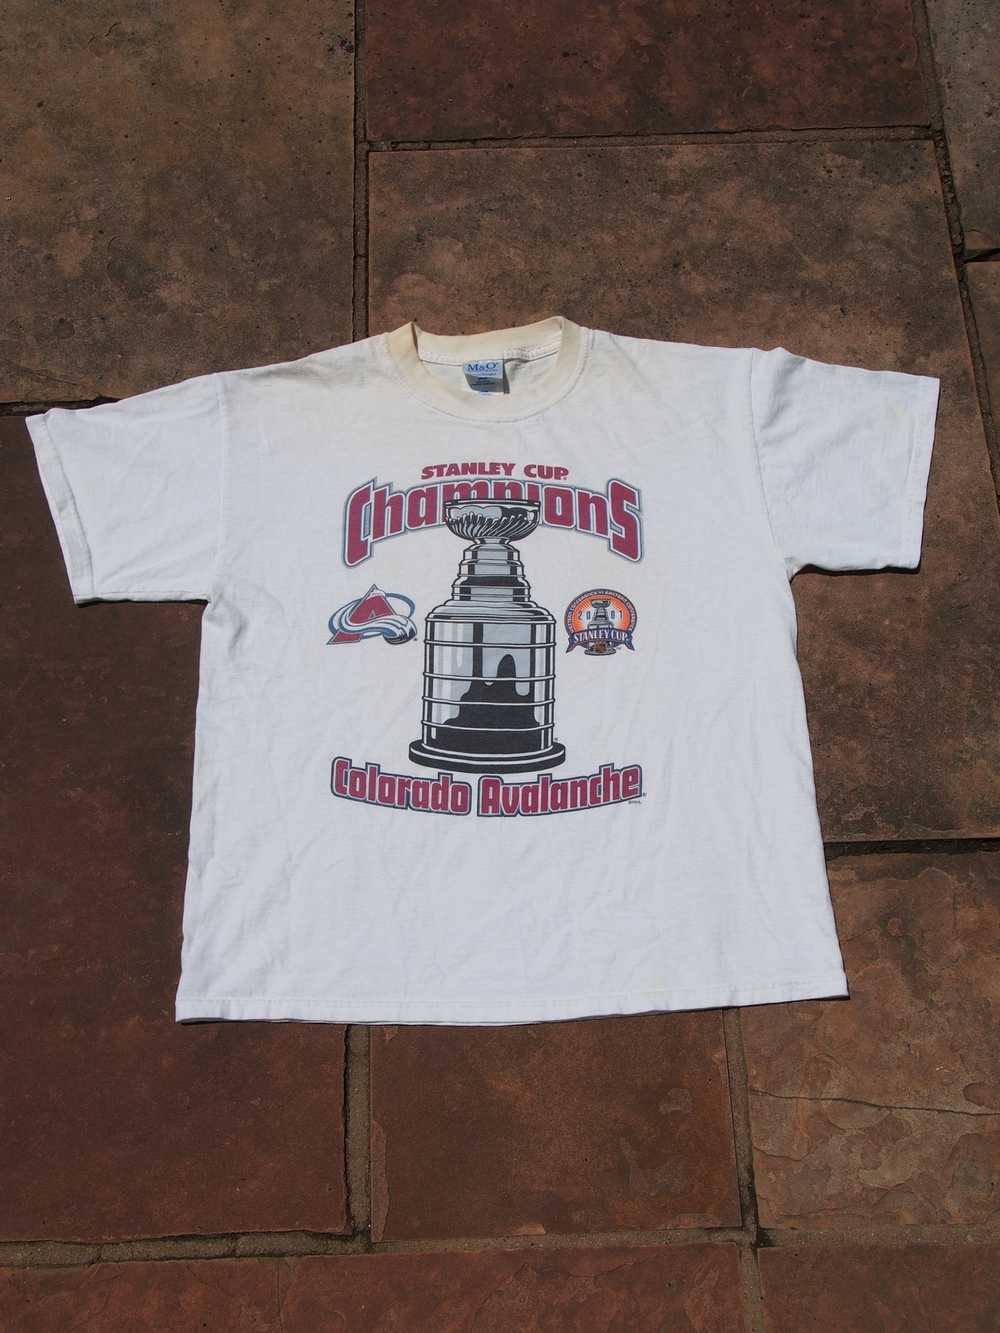 Colorado Avalanche 1996 2001 2022 Stanley Cup Champions We Are The  Champions Shirt - Limotees